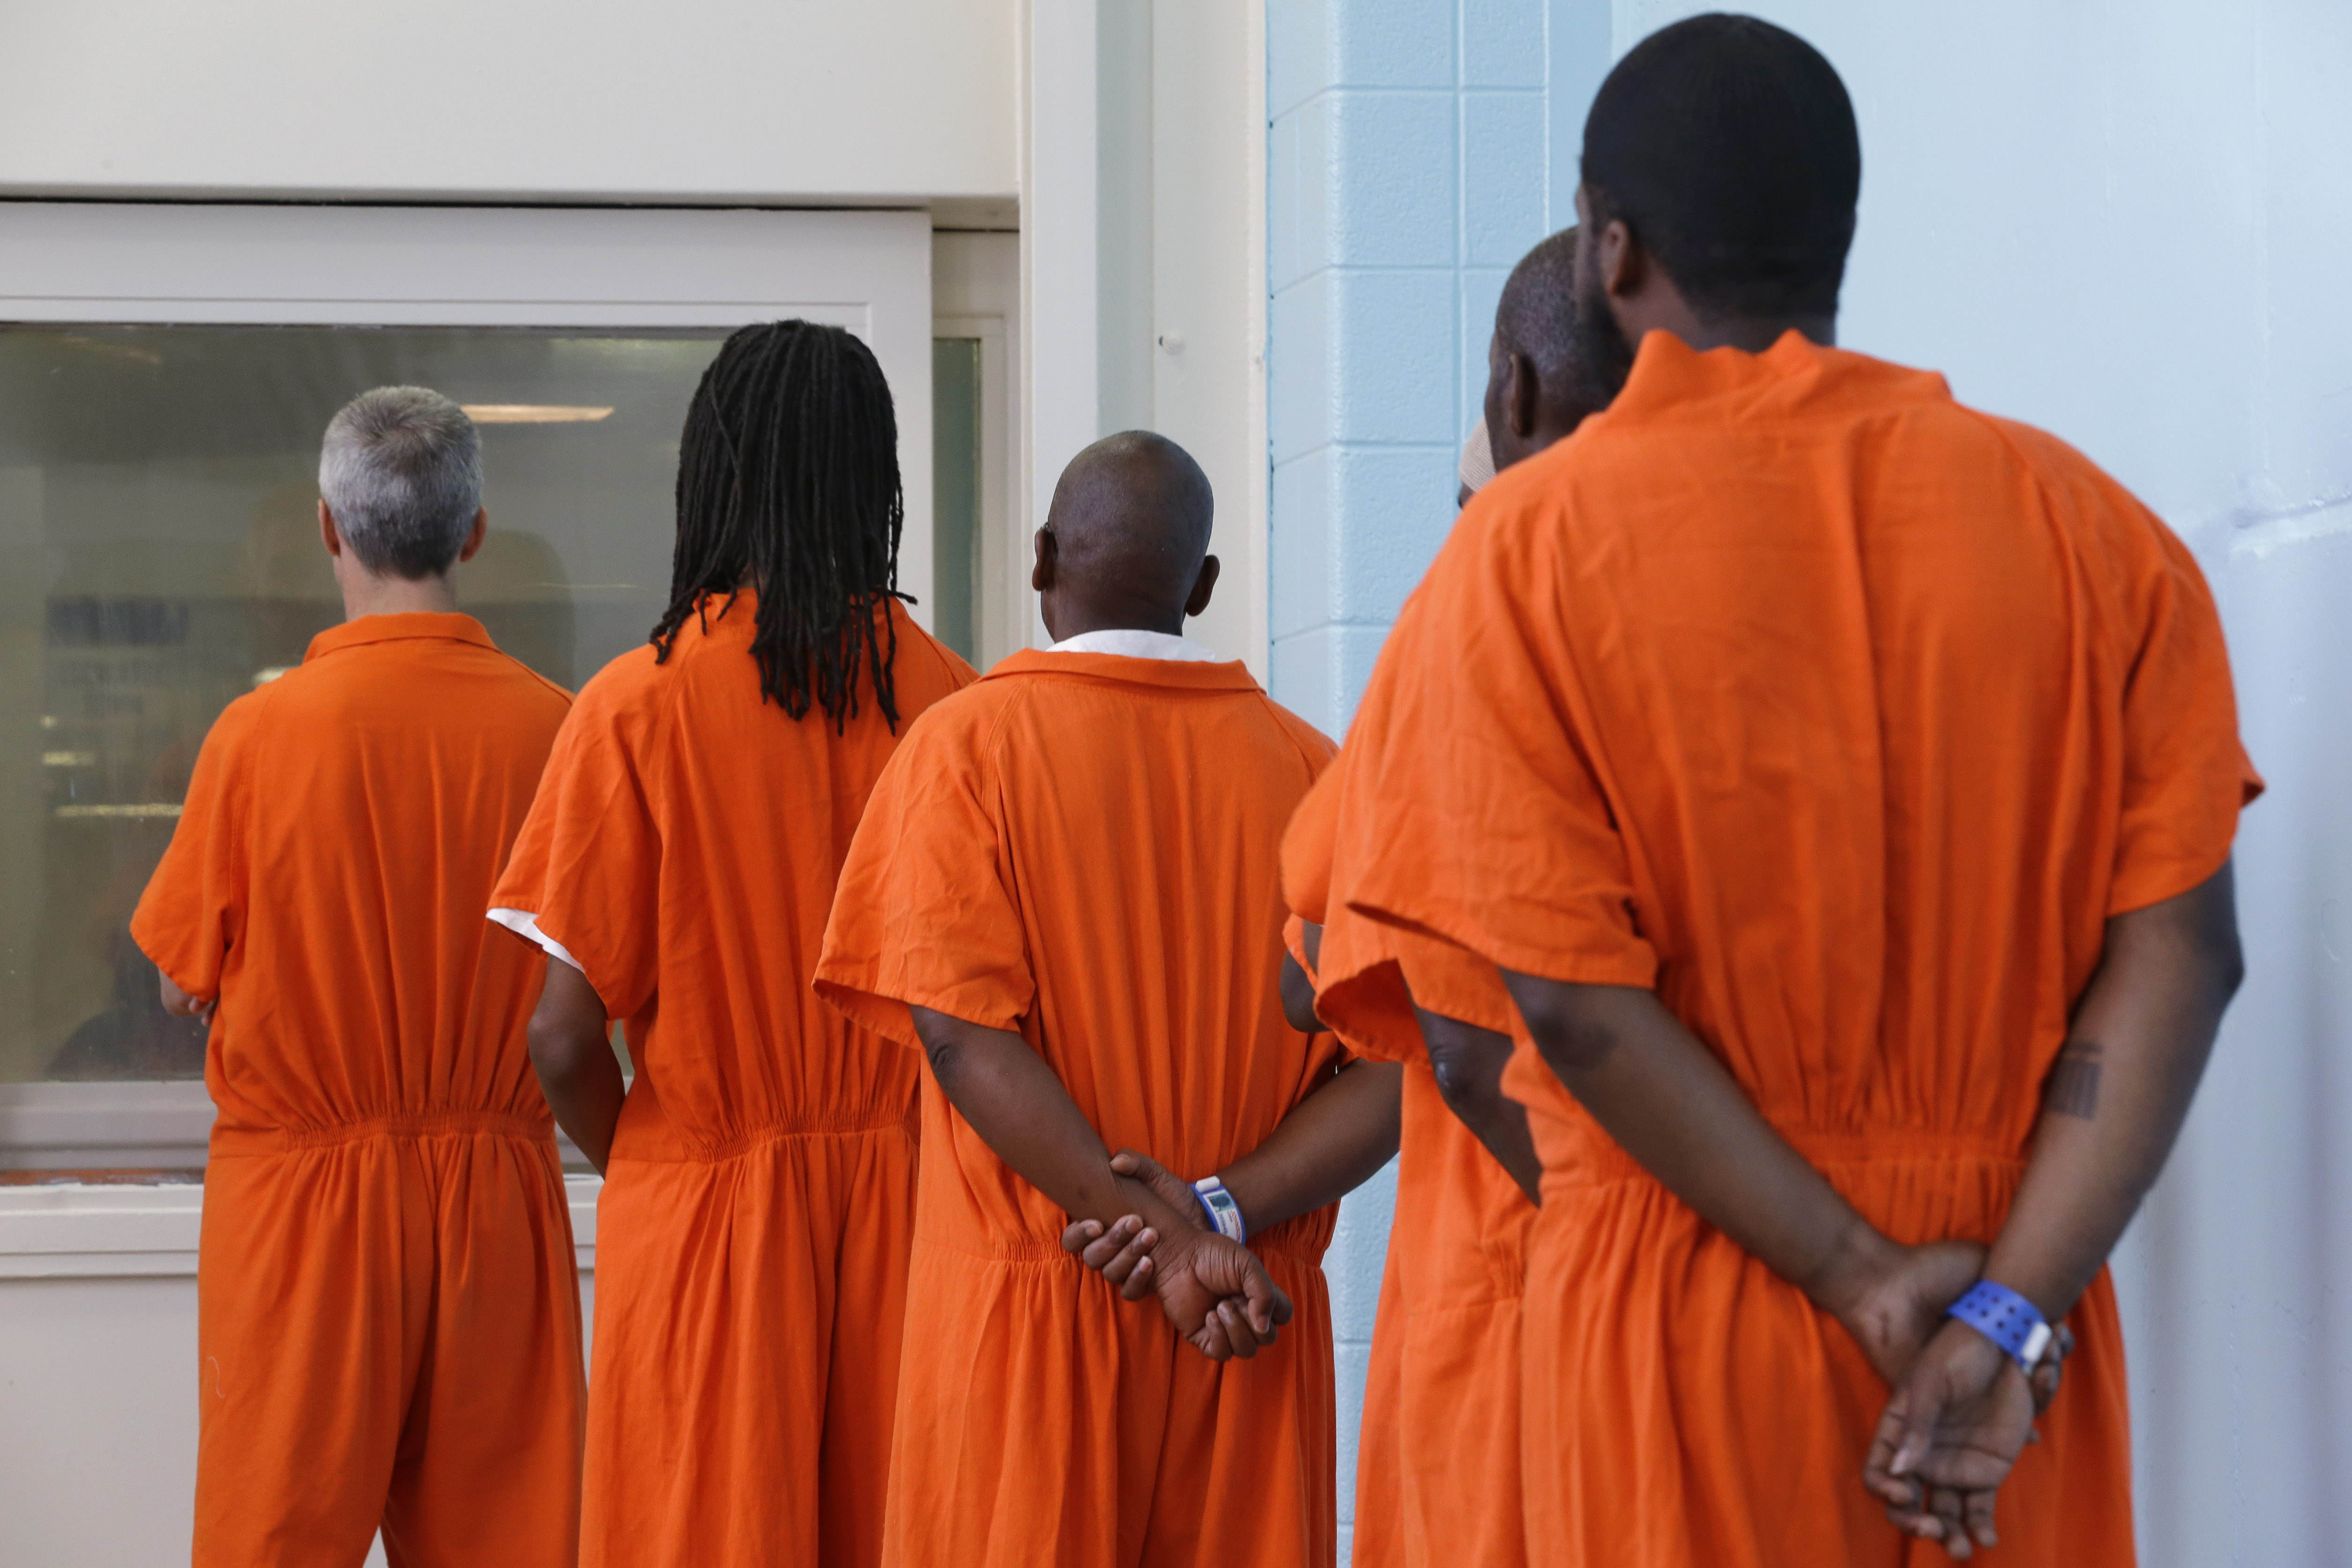 Racism in the criminal justice system permeates American society.